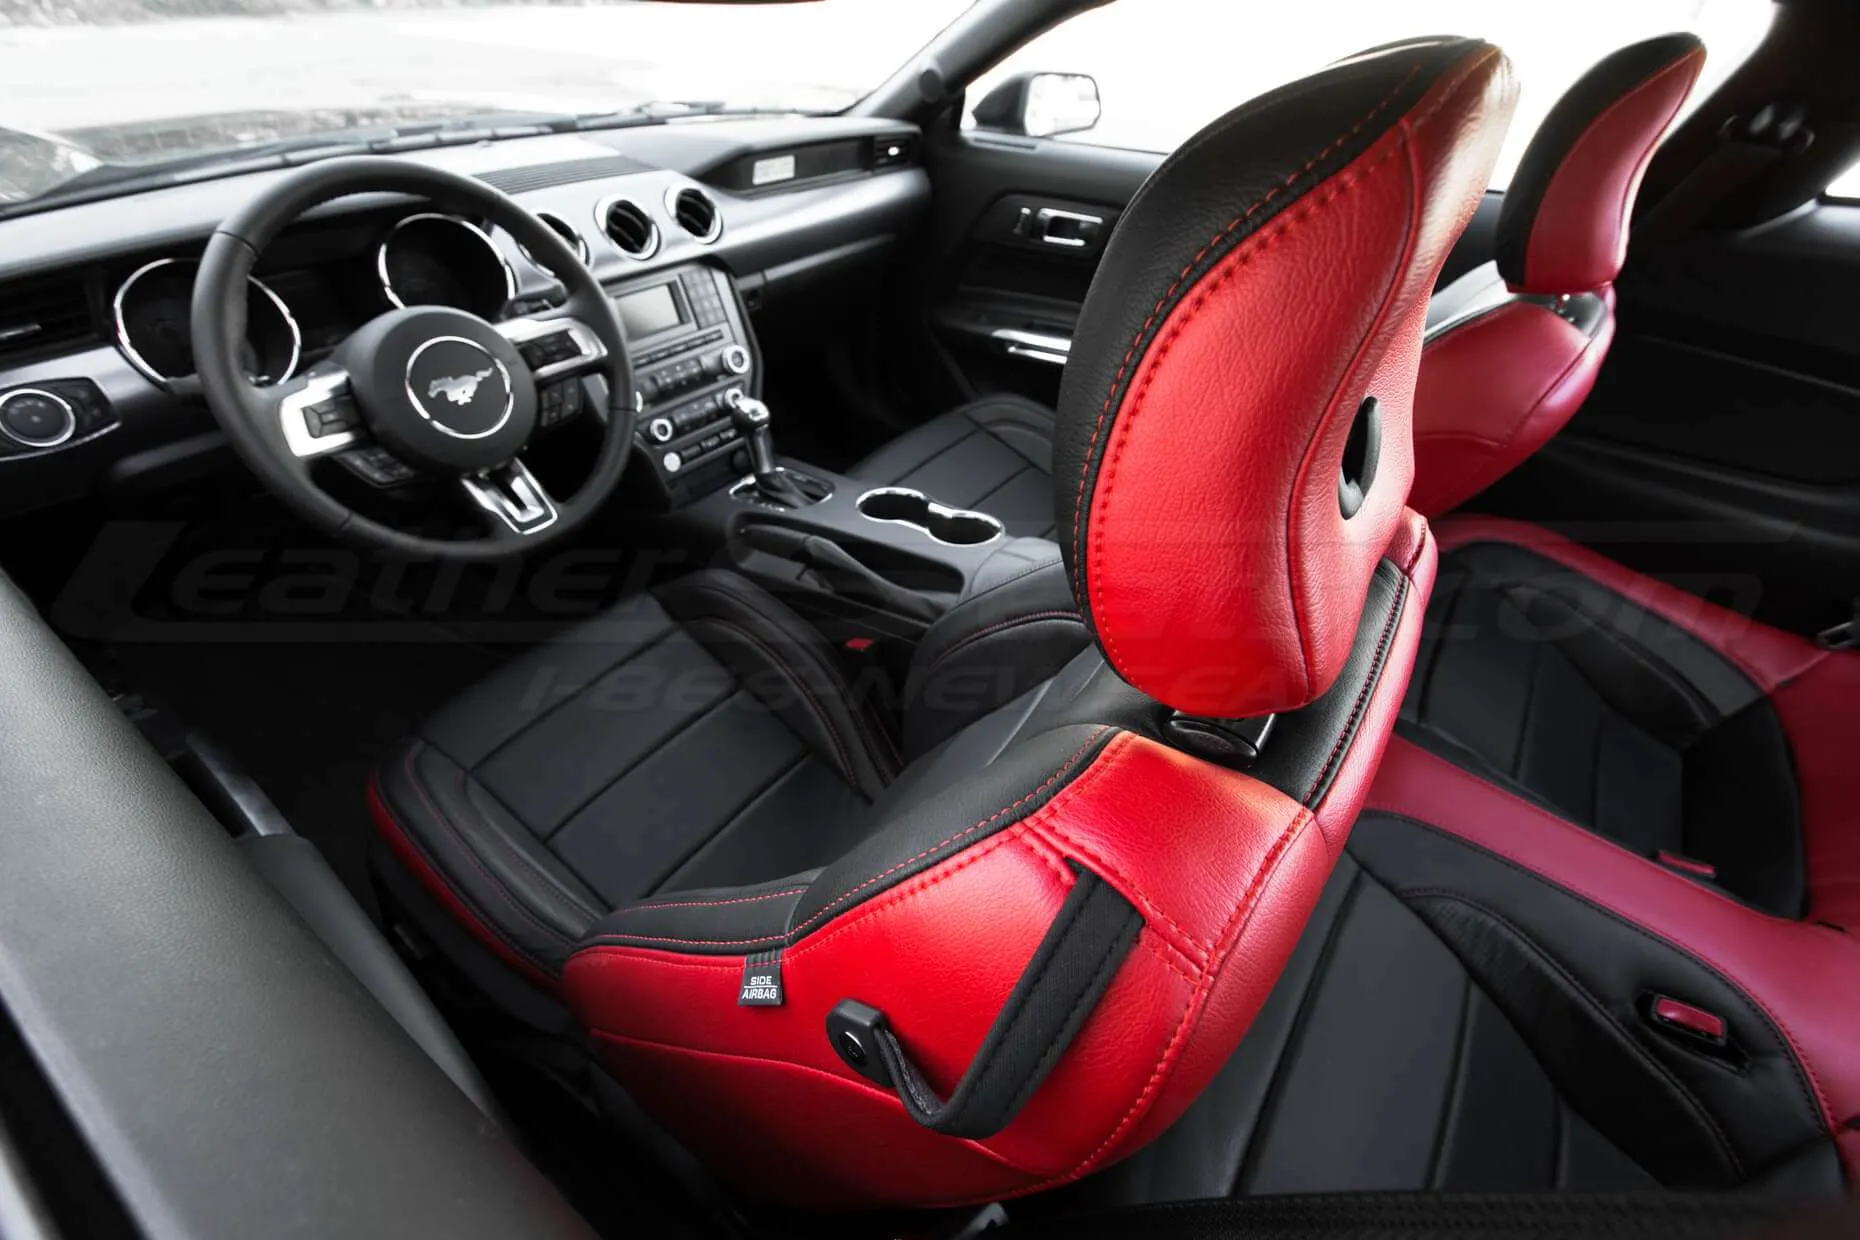 2015-2021 Ford Mustang Leather Upholstery Kit - Black & Bright Red - Installed - Headrest double-stitching